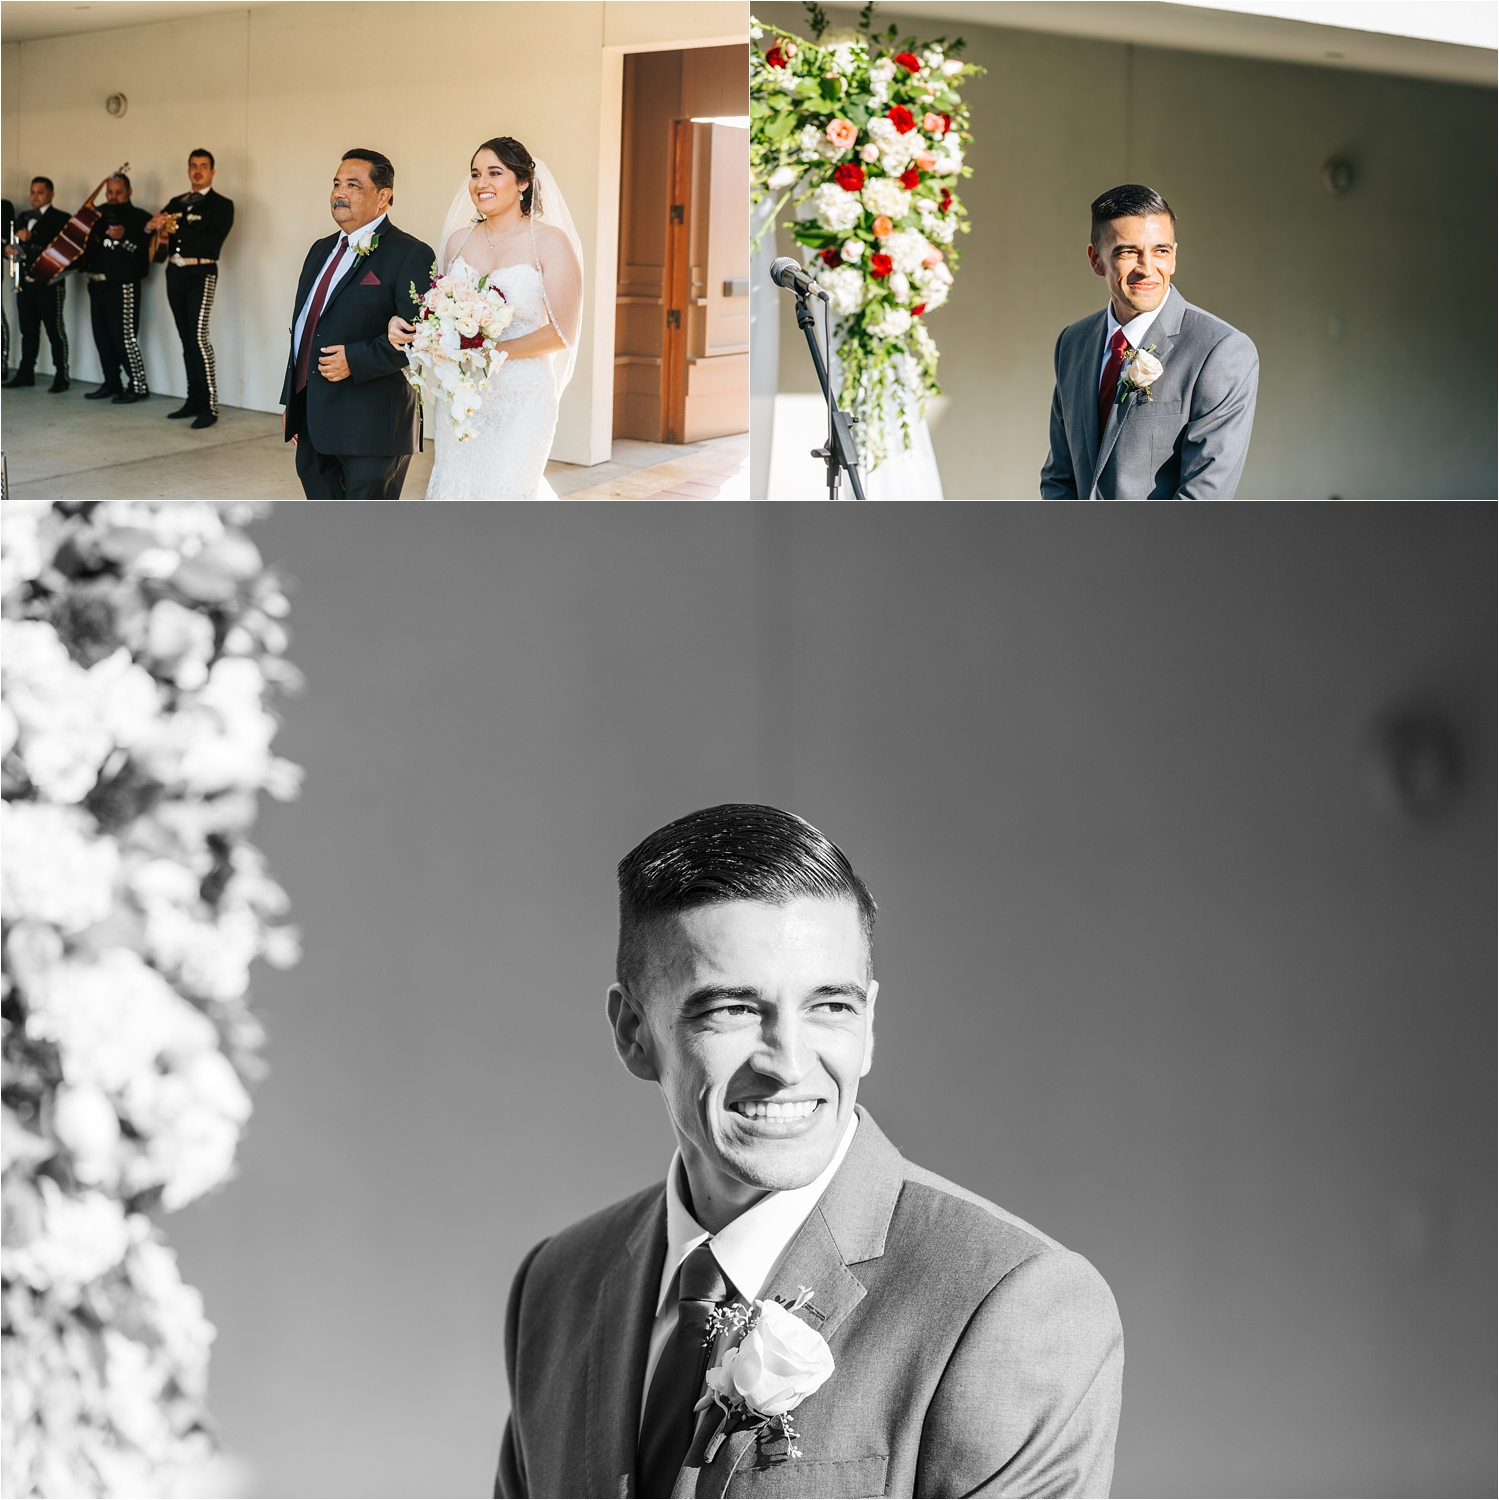 Groom sees bride for the first time - https://brittneyhannonphotography.com